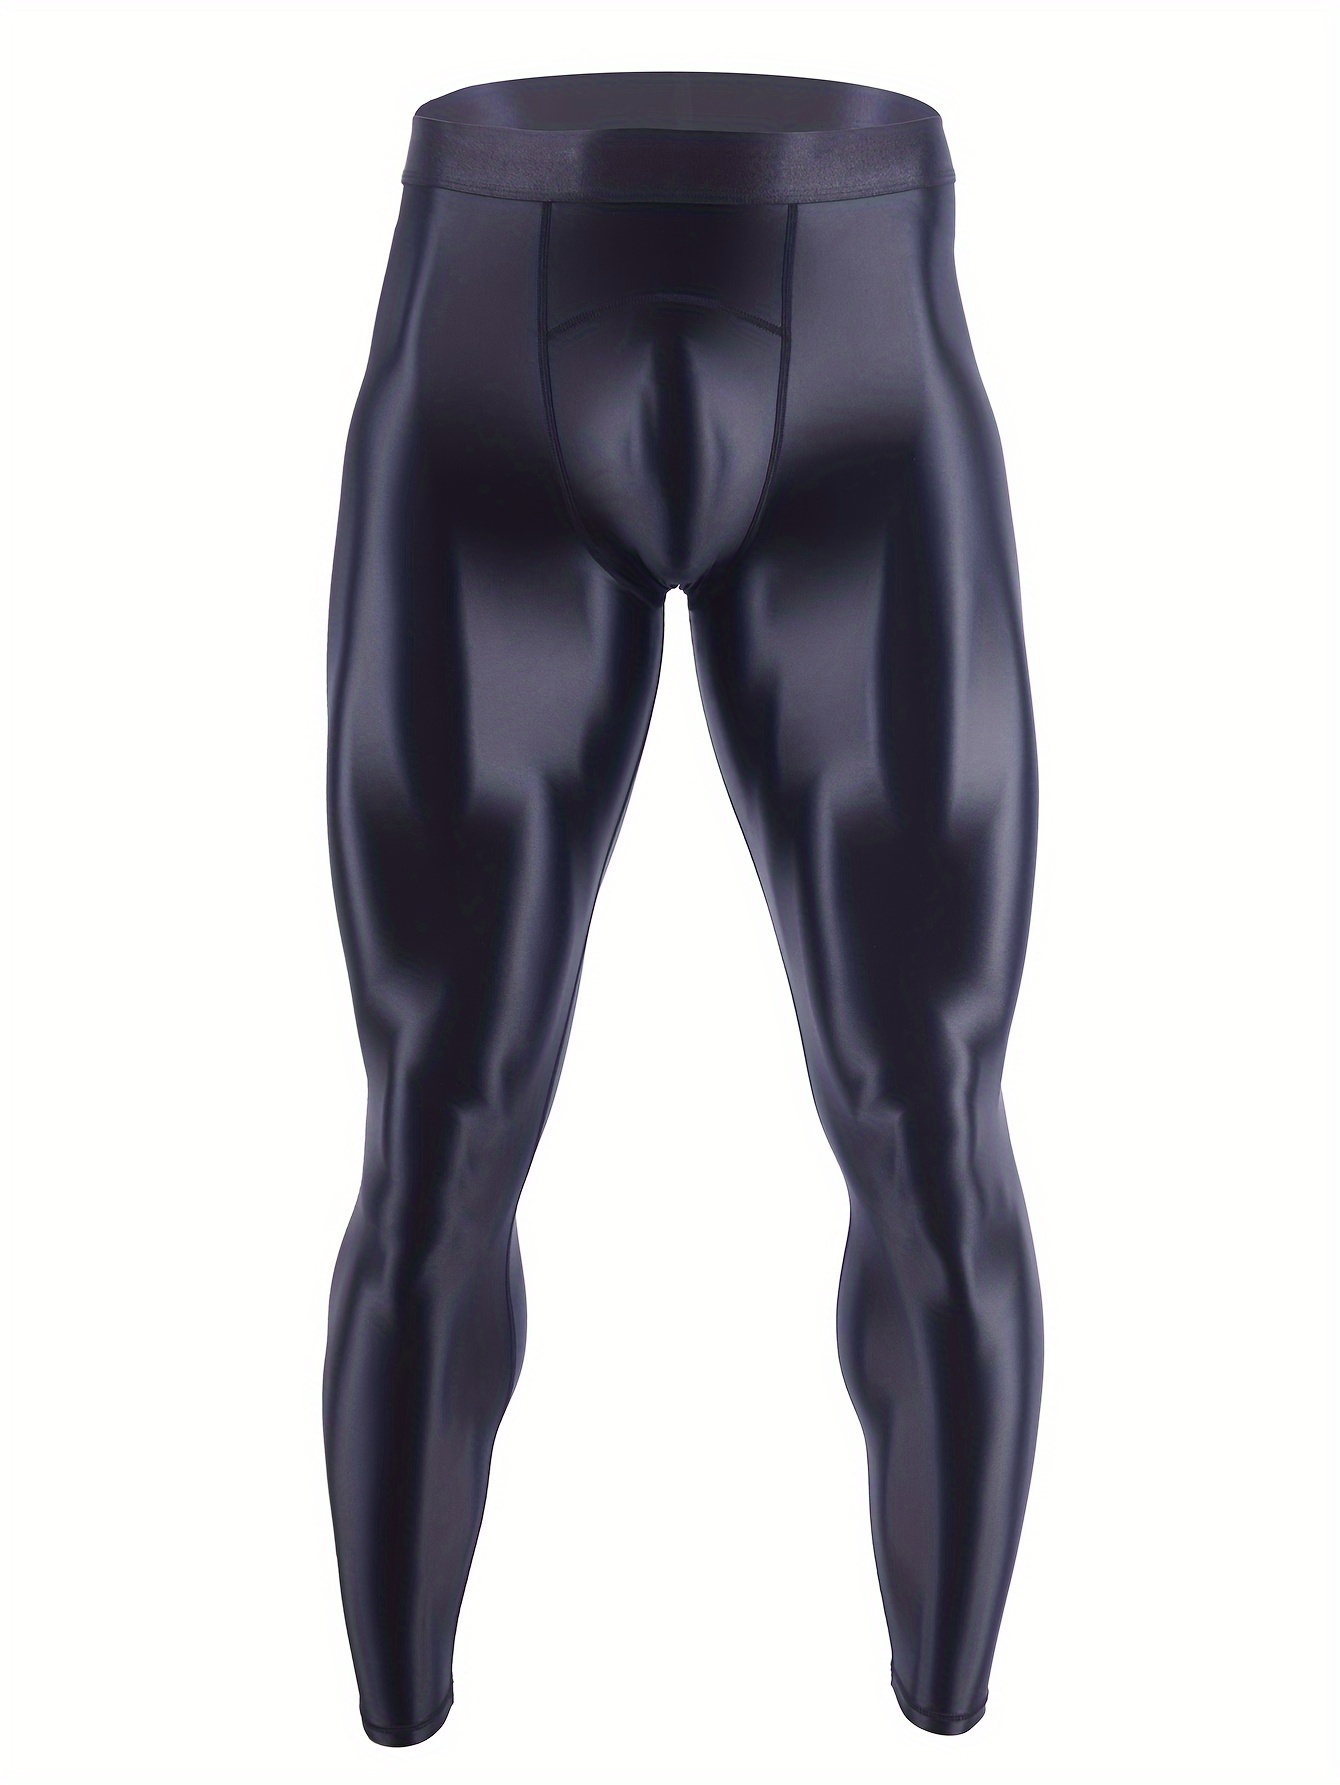 Men's Lycra For The Gym Running Sports Tights Print Training